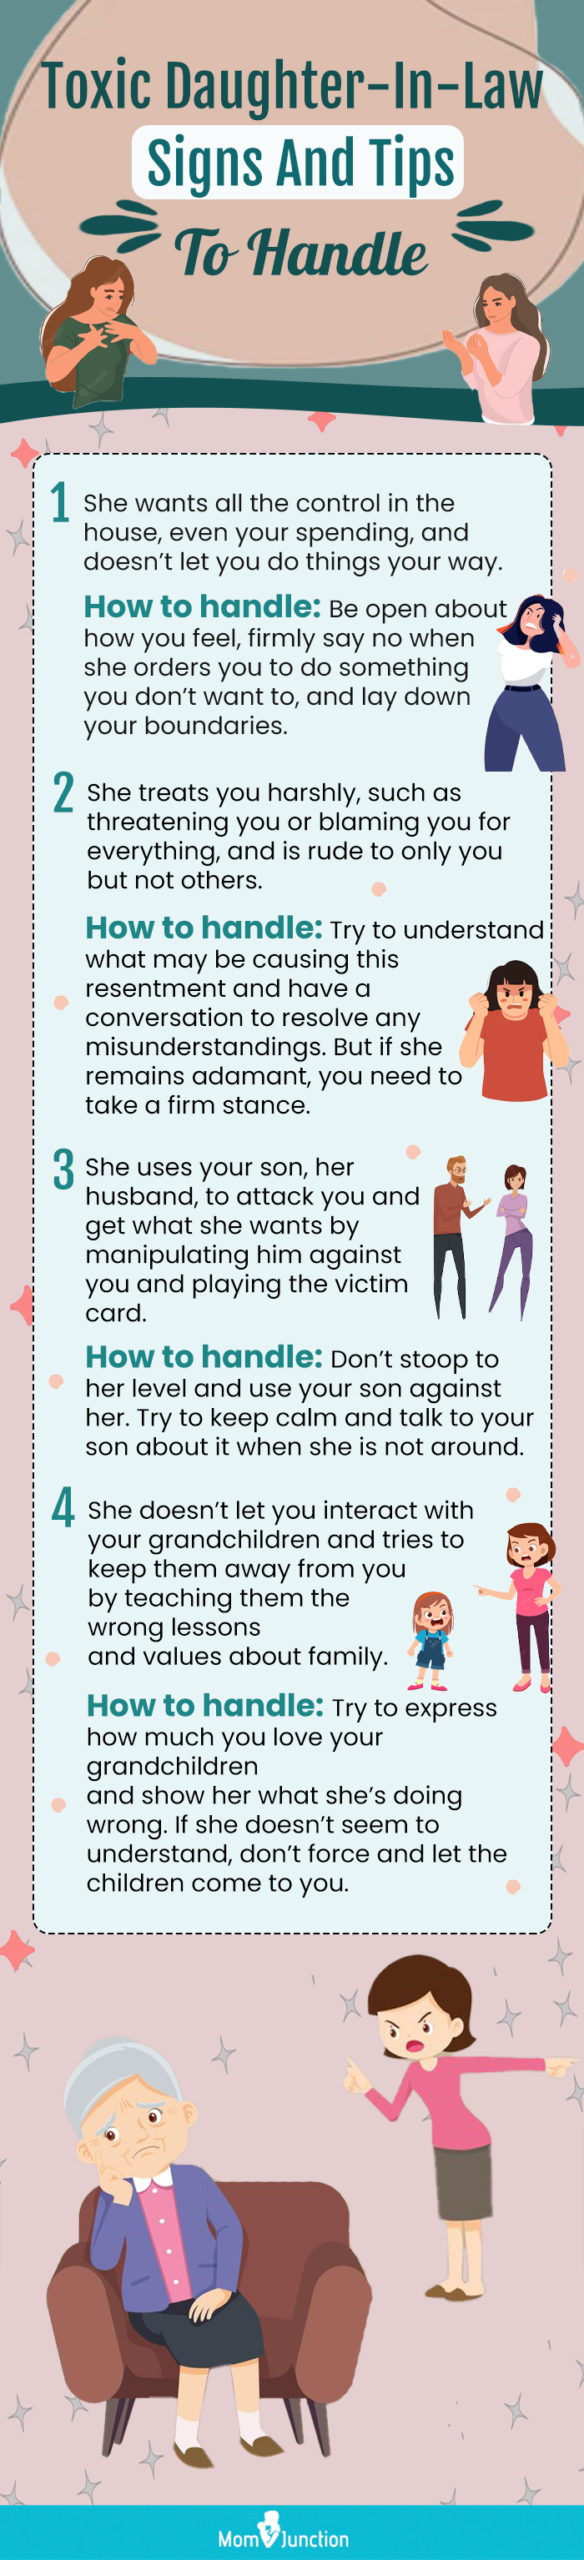 toxic daughter-in-law signs and tips to handle [infographic]